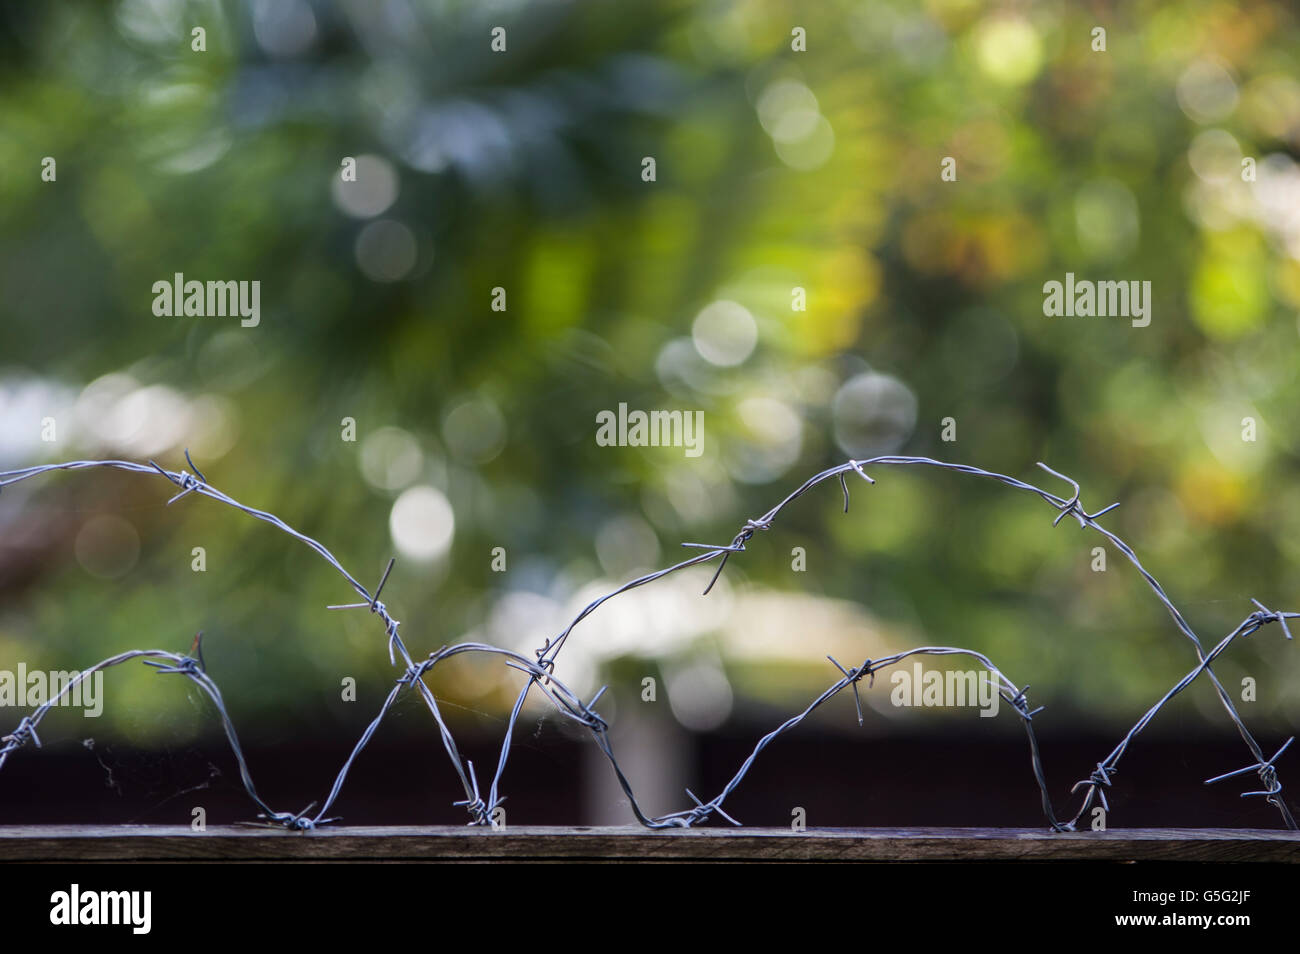 A coil of barbed wire atop a wooden fence Stock Photo